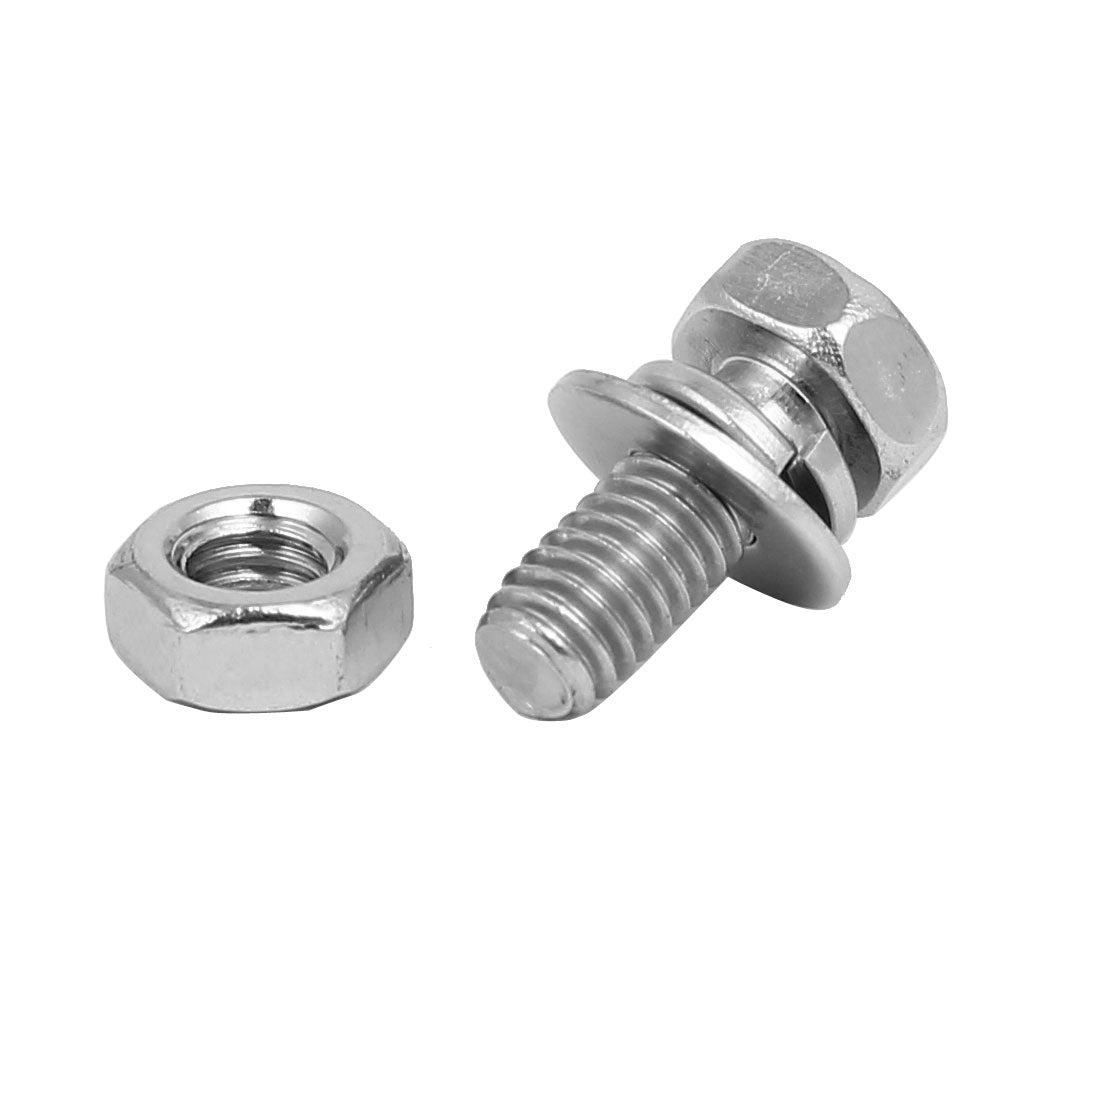 uxcell Uxcell M4 x 10mm 304 Stainless Steel Phillips Hex Head Bolts Nuts w Washers 15 Sets